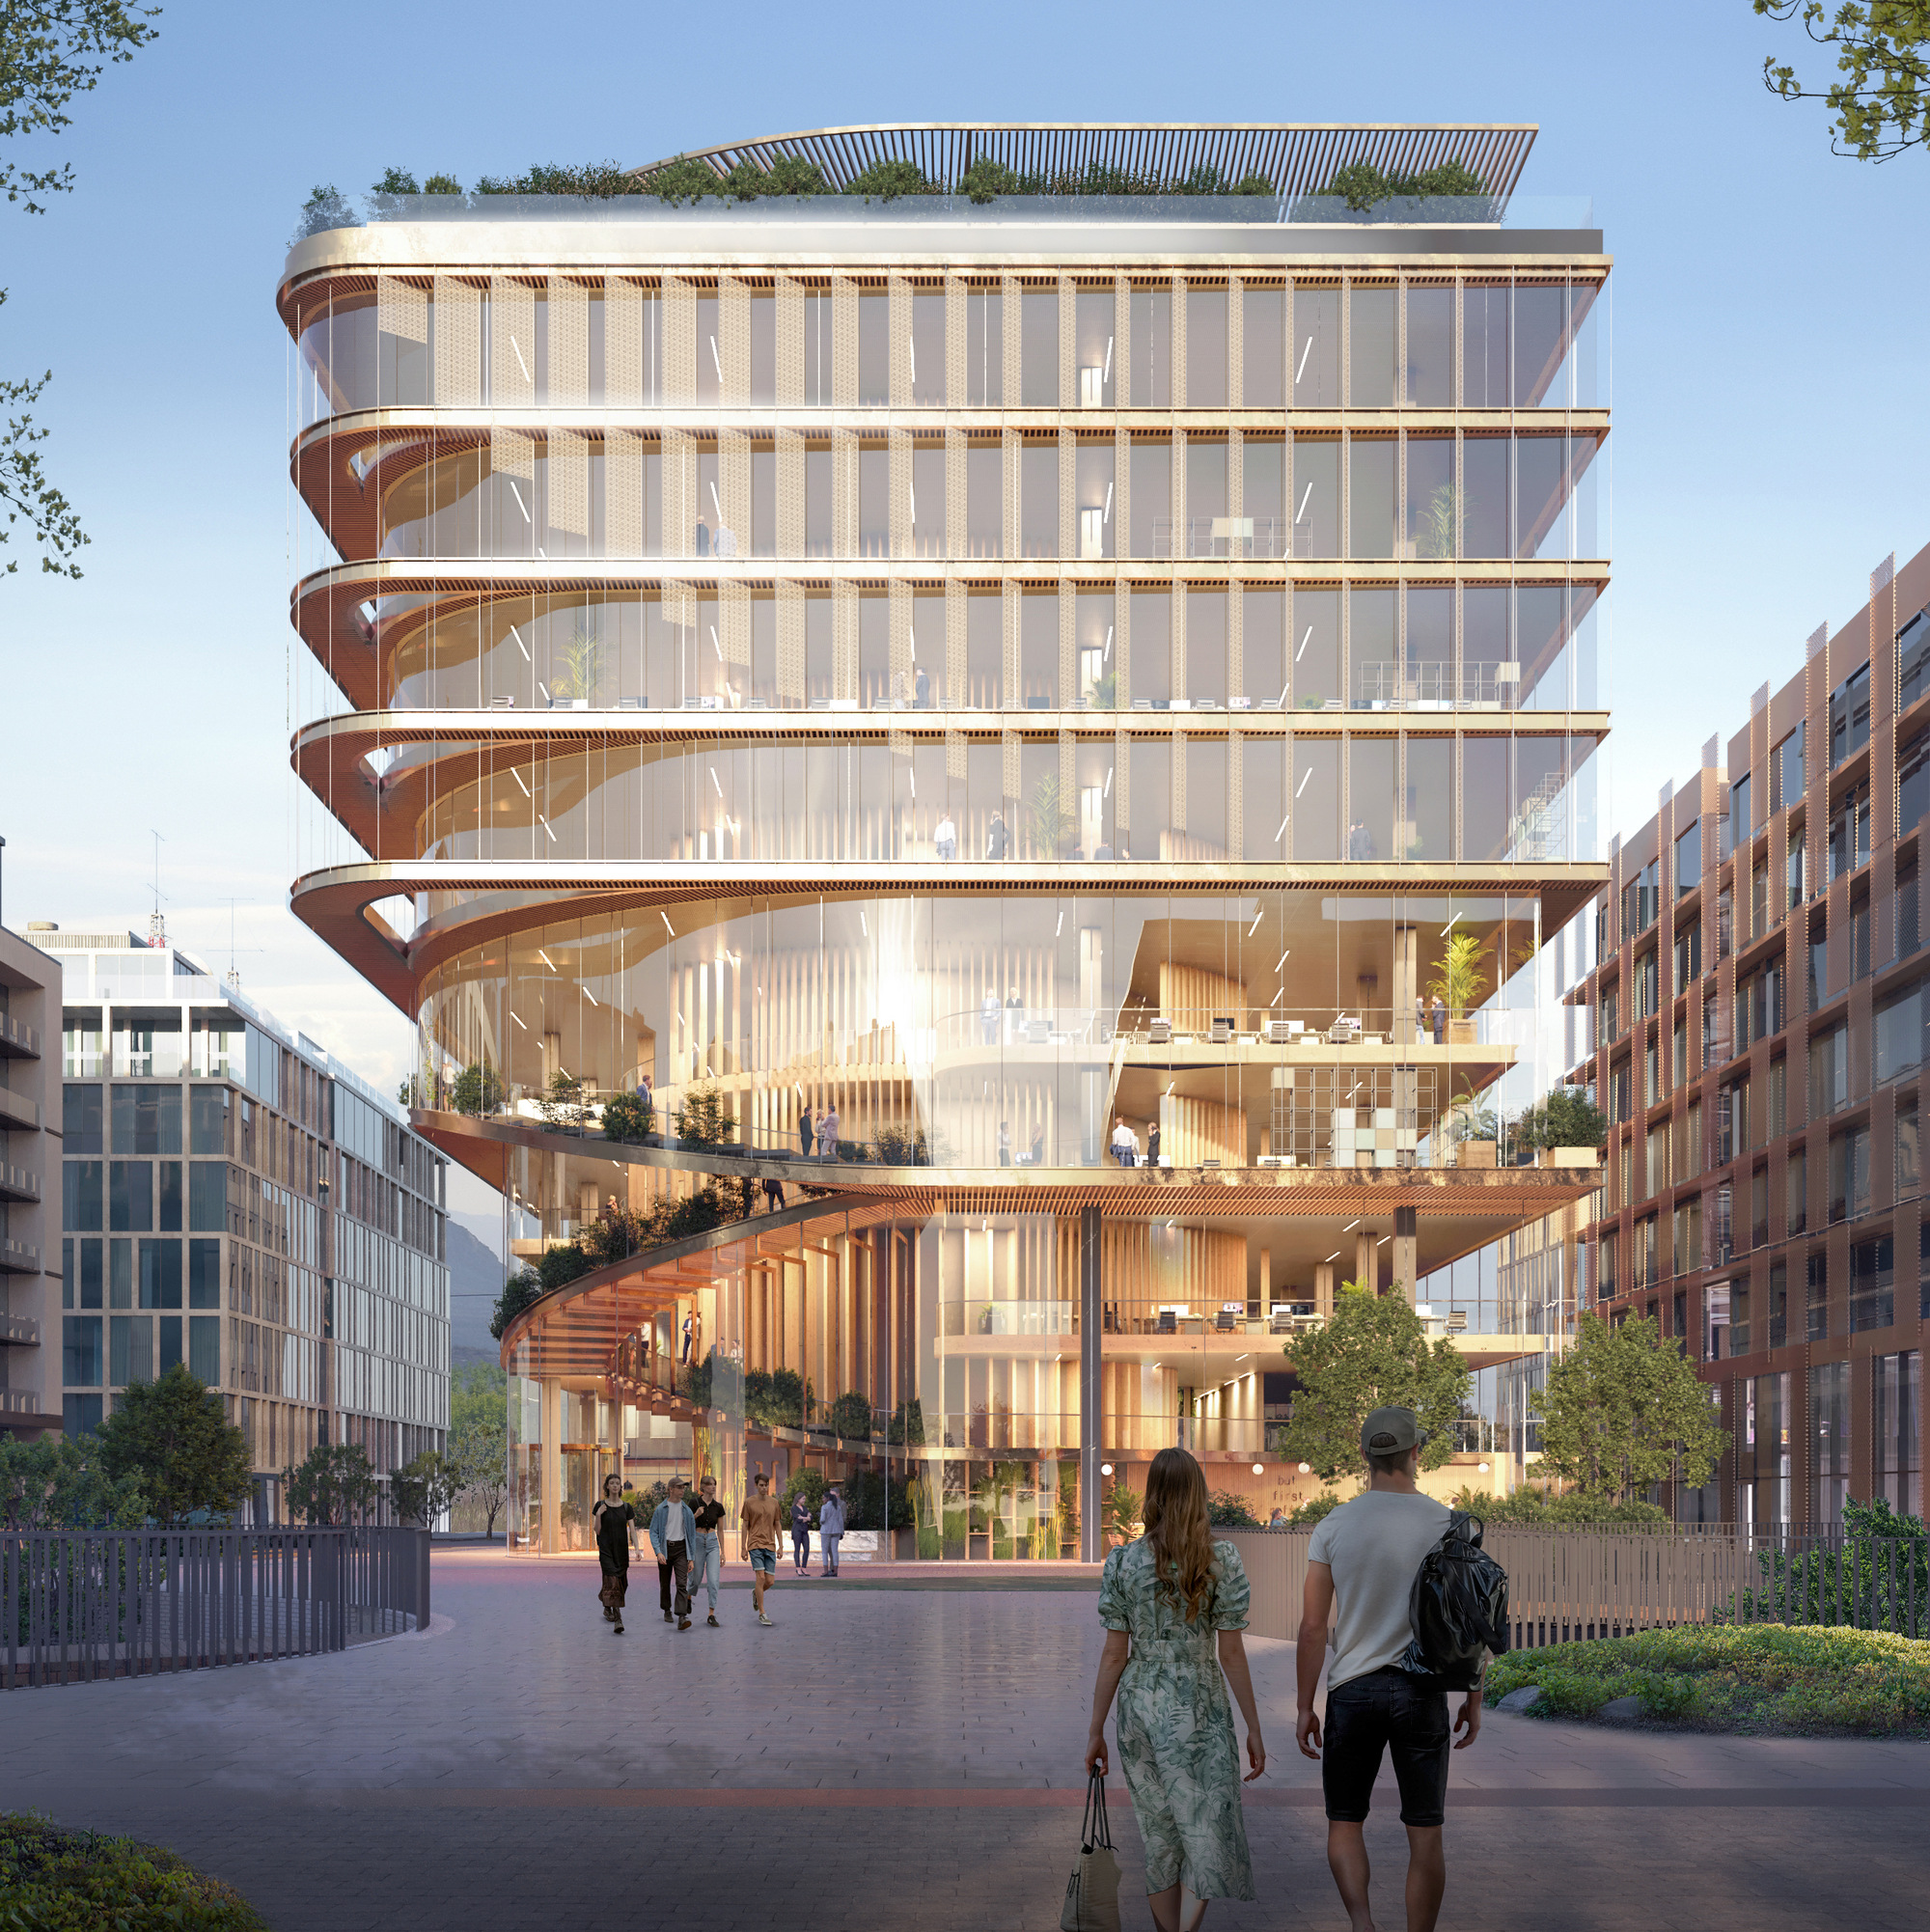 PRESS RELEASE | Only timber is not the answer. UNStudio calculates the lowest carbon footprint for the new Kyklos building in Luxembourg…and the result is hybrid